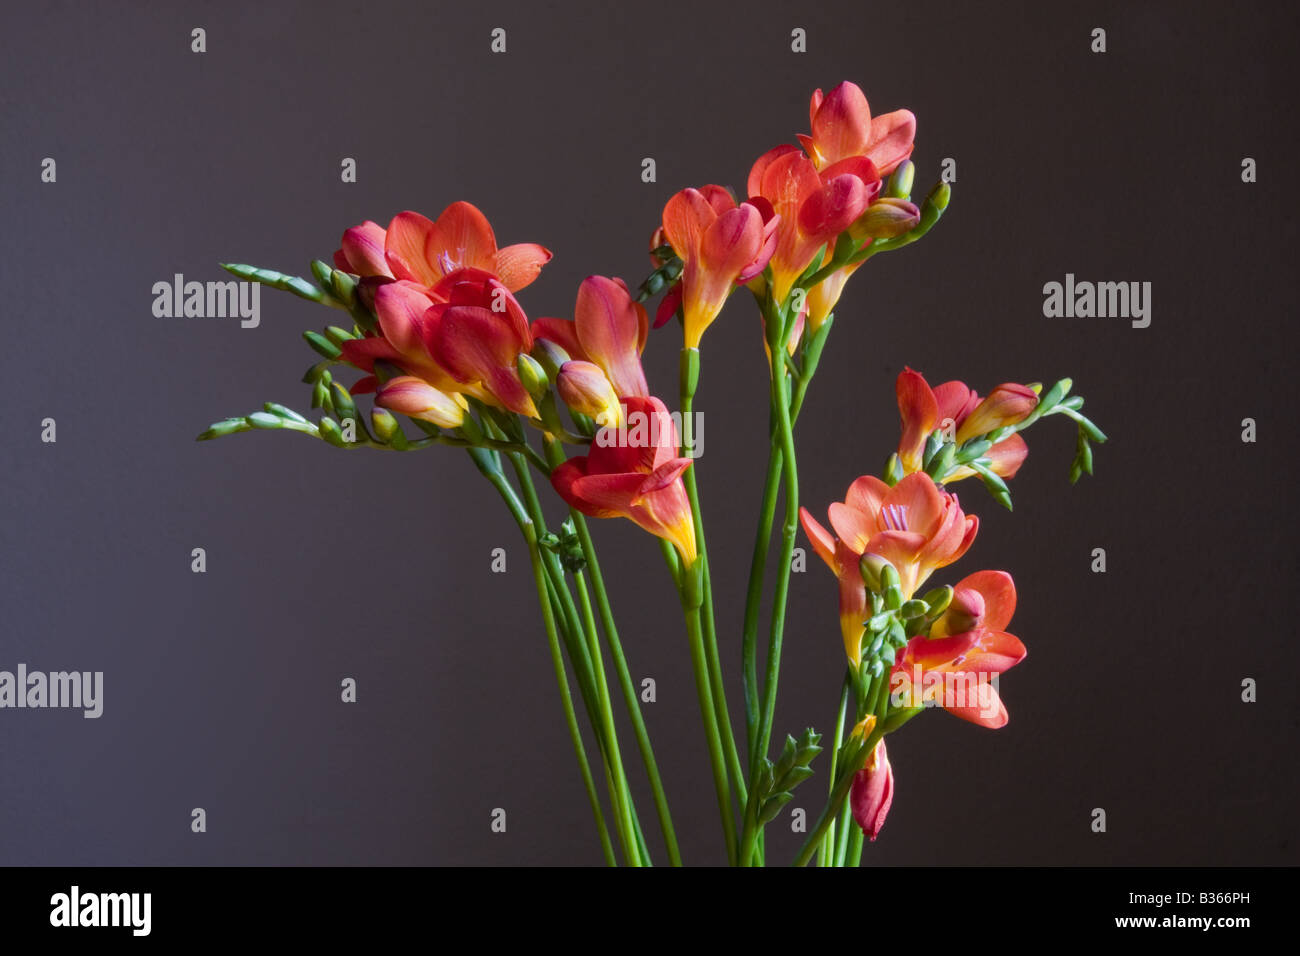 cut red freesia flowers photographed low key Stock Photo